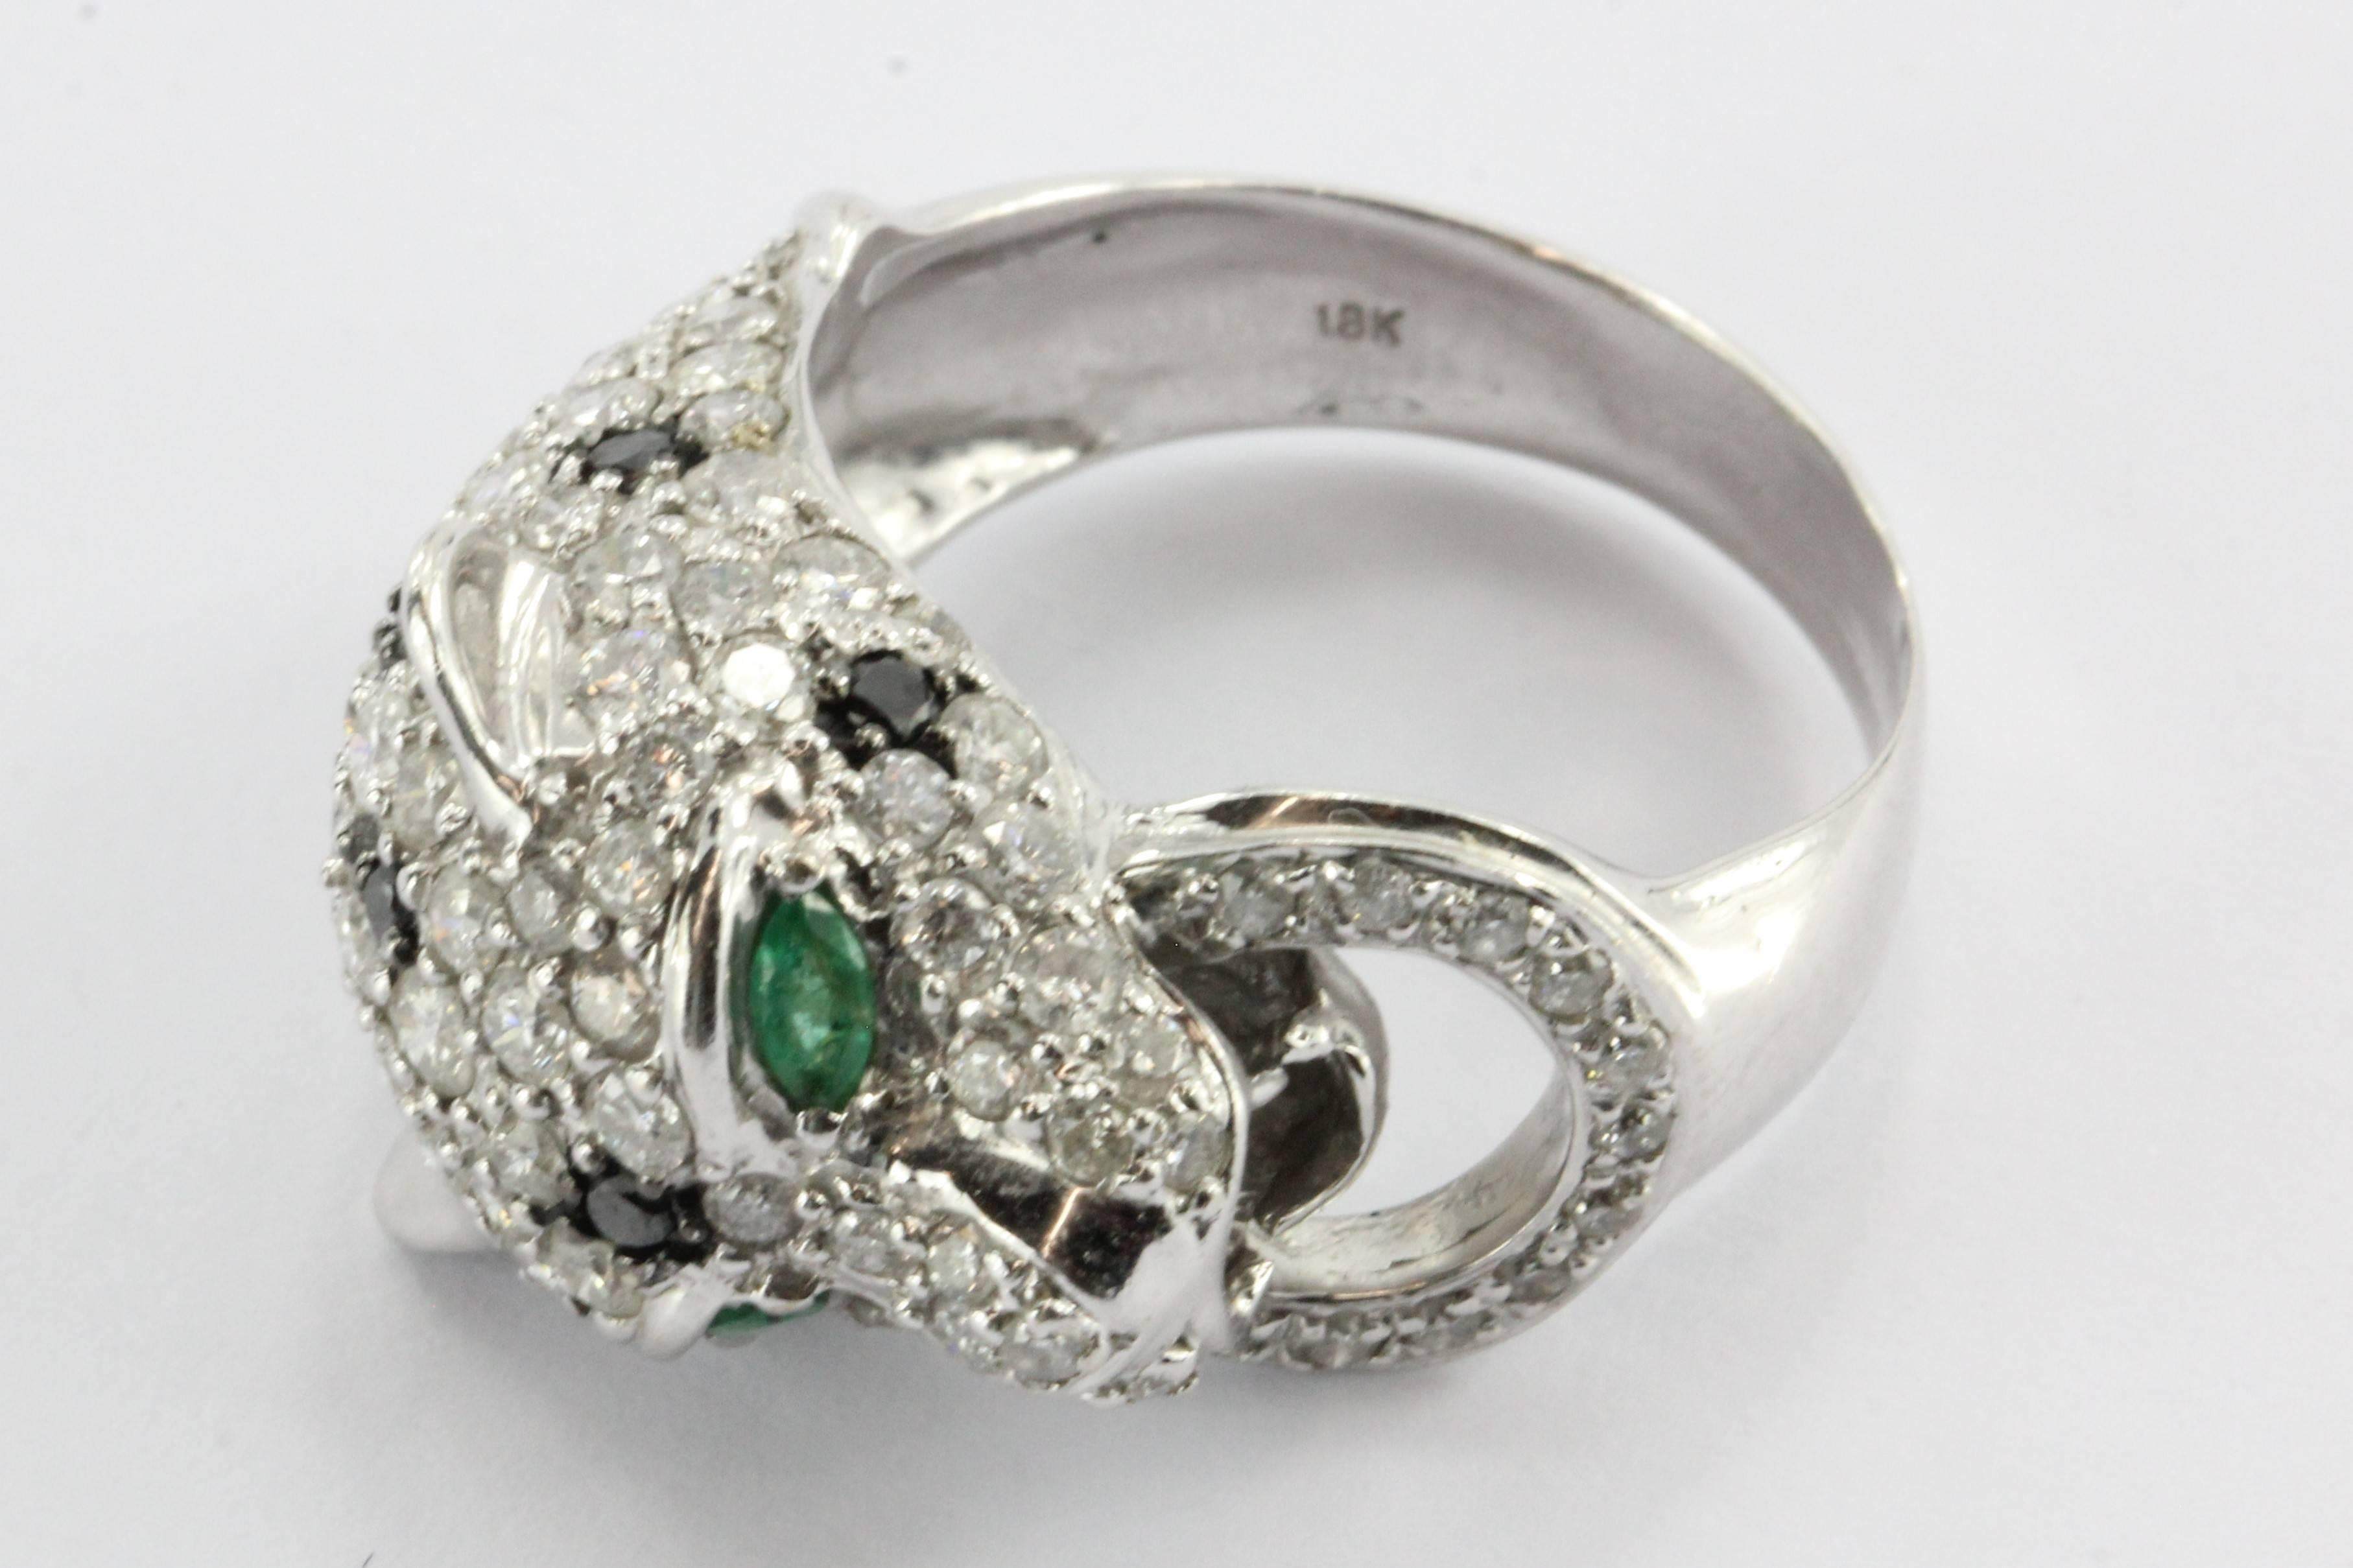 18K White Gold Diamond & Emerald Figural Leopard / Jaguar Ring. The piece is in excellent estate condition and ready to wear. It is hallmarked 750 18K. The piece is set with approximately .15 carats of emeralds in the eyes and 1.35 carats of